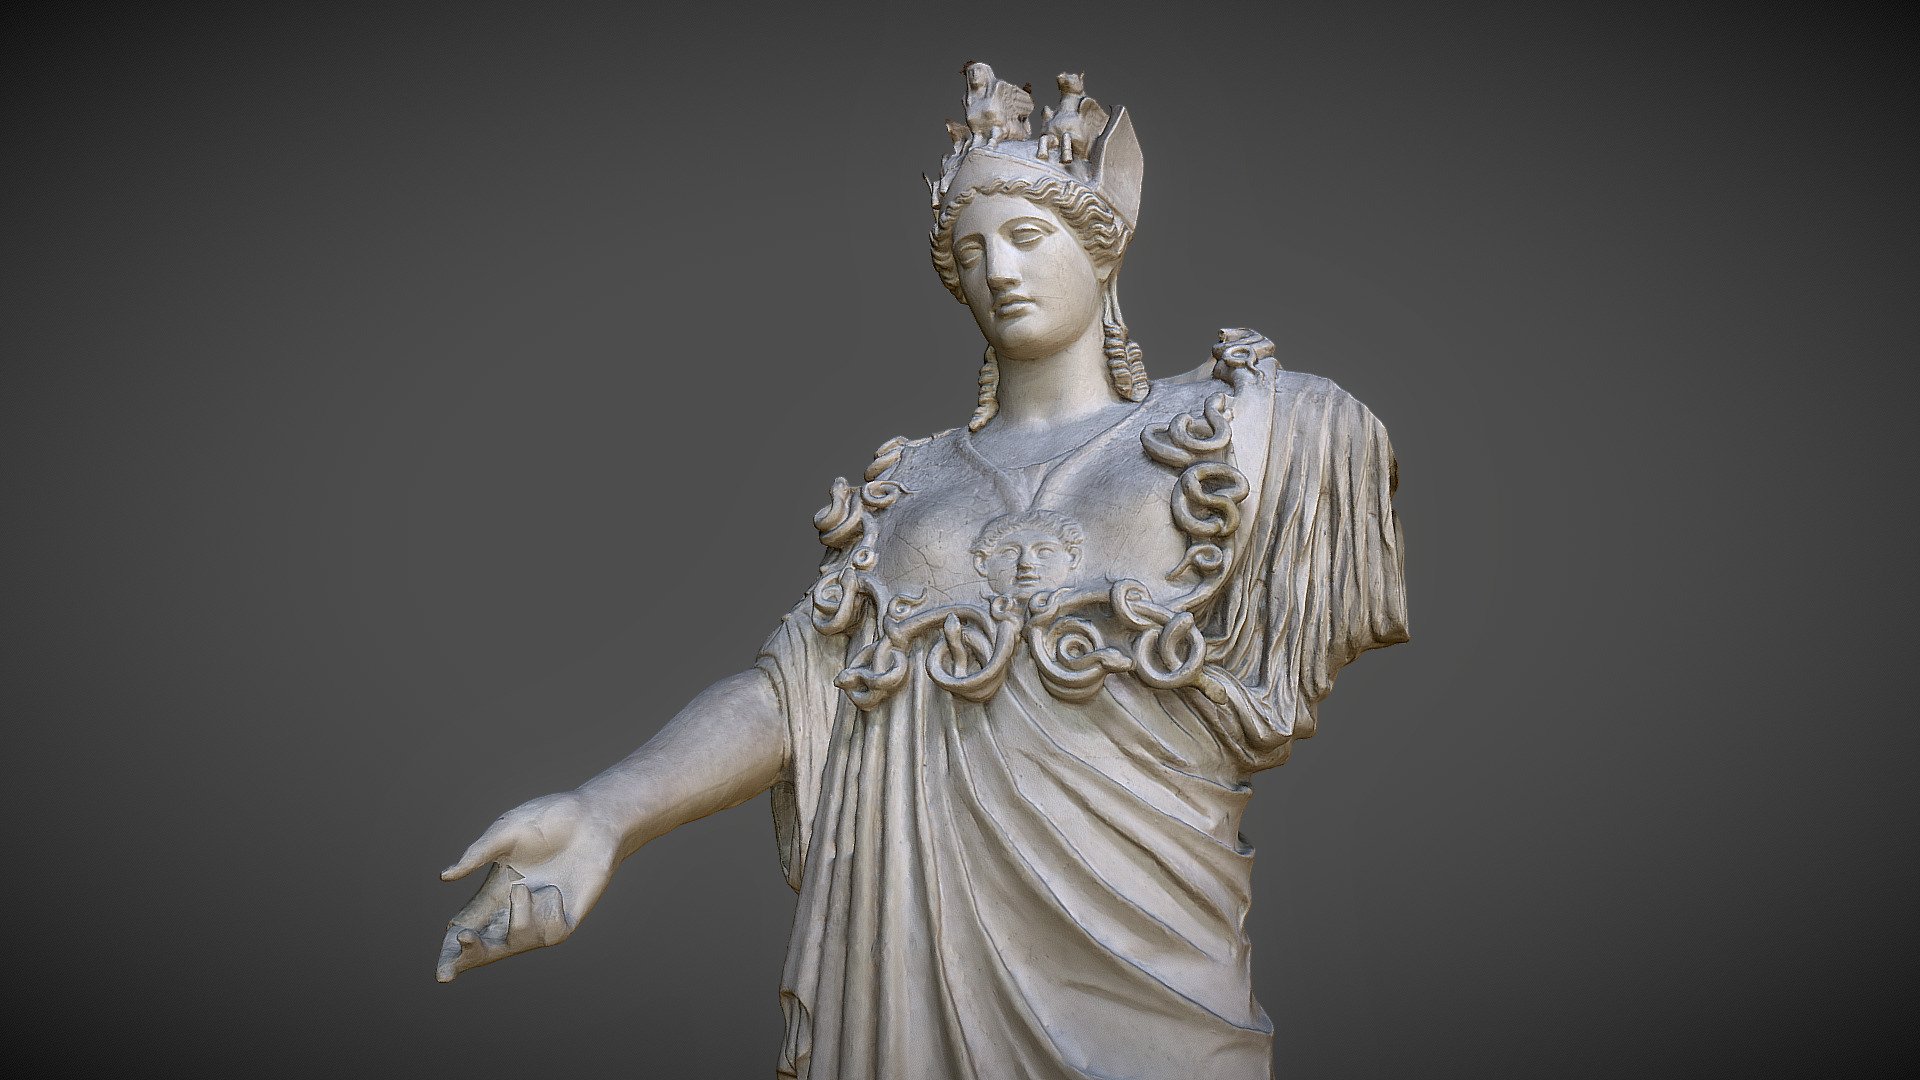 Athena Hope-Farnese. This statue of Athena is a plaster copy Roman copy of a Greek original of the late 5th century BCE. The Royal Cast Collection (Copenhagen, Denmark). Made with Memento Beta (now ReMake) from Autodesk.

The elaborate helmet of the Goddess is inspired by the one of Athena Parthenos in the Parthenon. Restored are the arms, animals on the helmet and cheekpieces, and some aegis snakes. Roman period, Height 224 cm. Naples, National Museum. 

For more updates, please follow @GeoffreyMarchal on Twitter 3d model